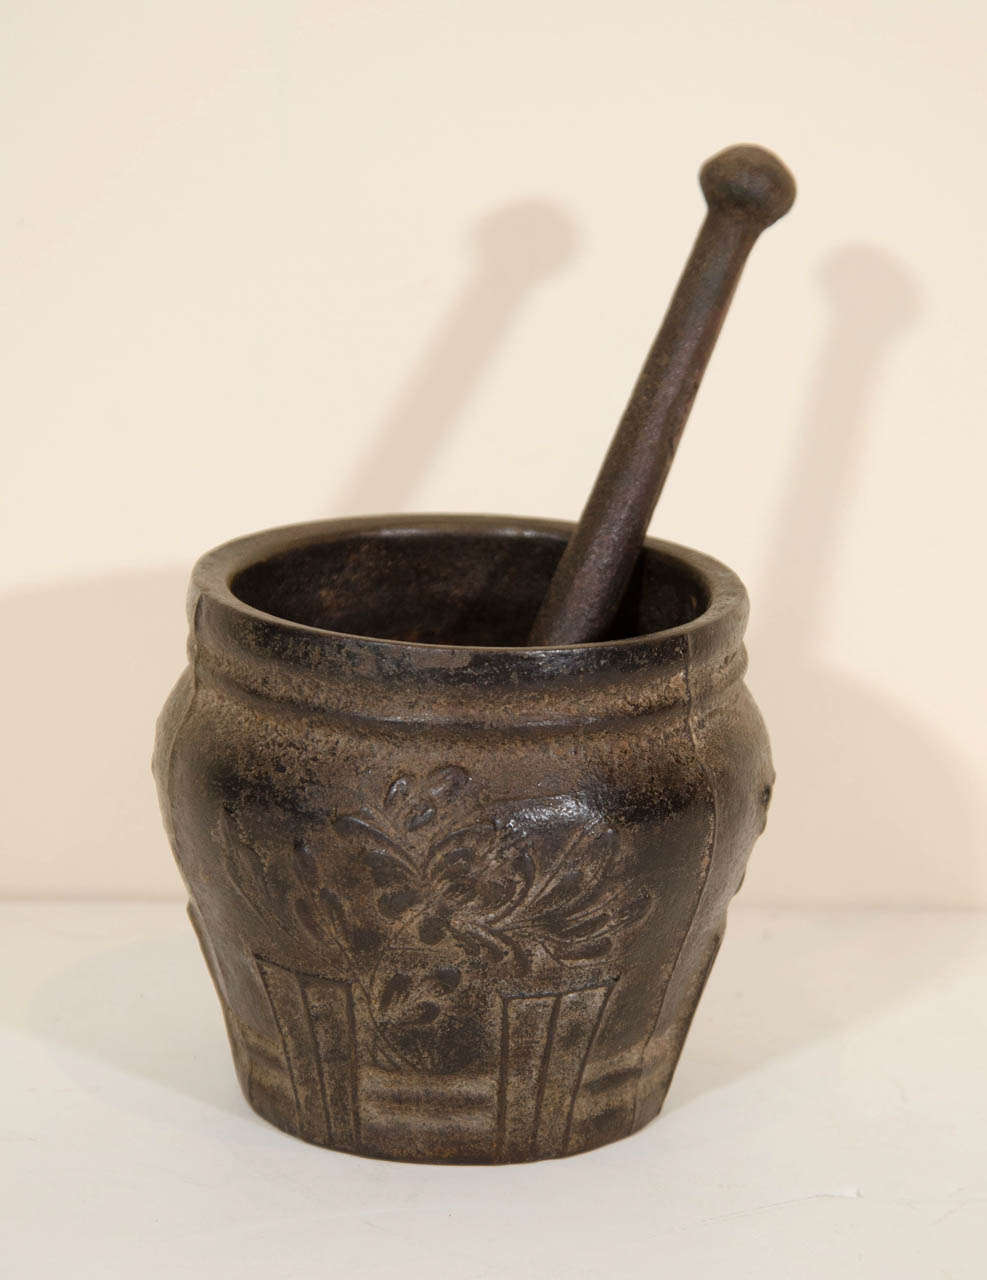 An artfully decorated 19th Century medicinal mortar and pestle. A great desk accessory. From China, Shanxi Province, circa 1850.